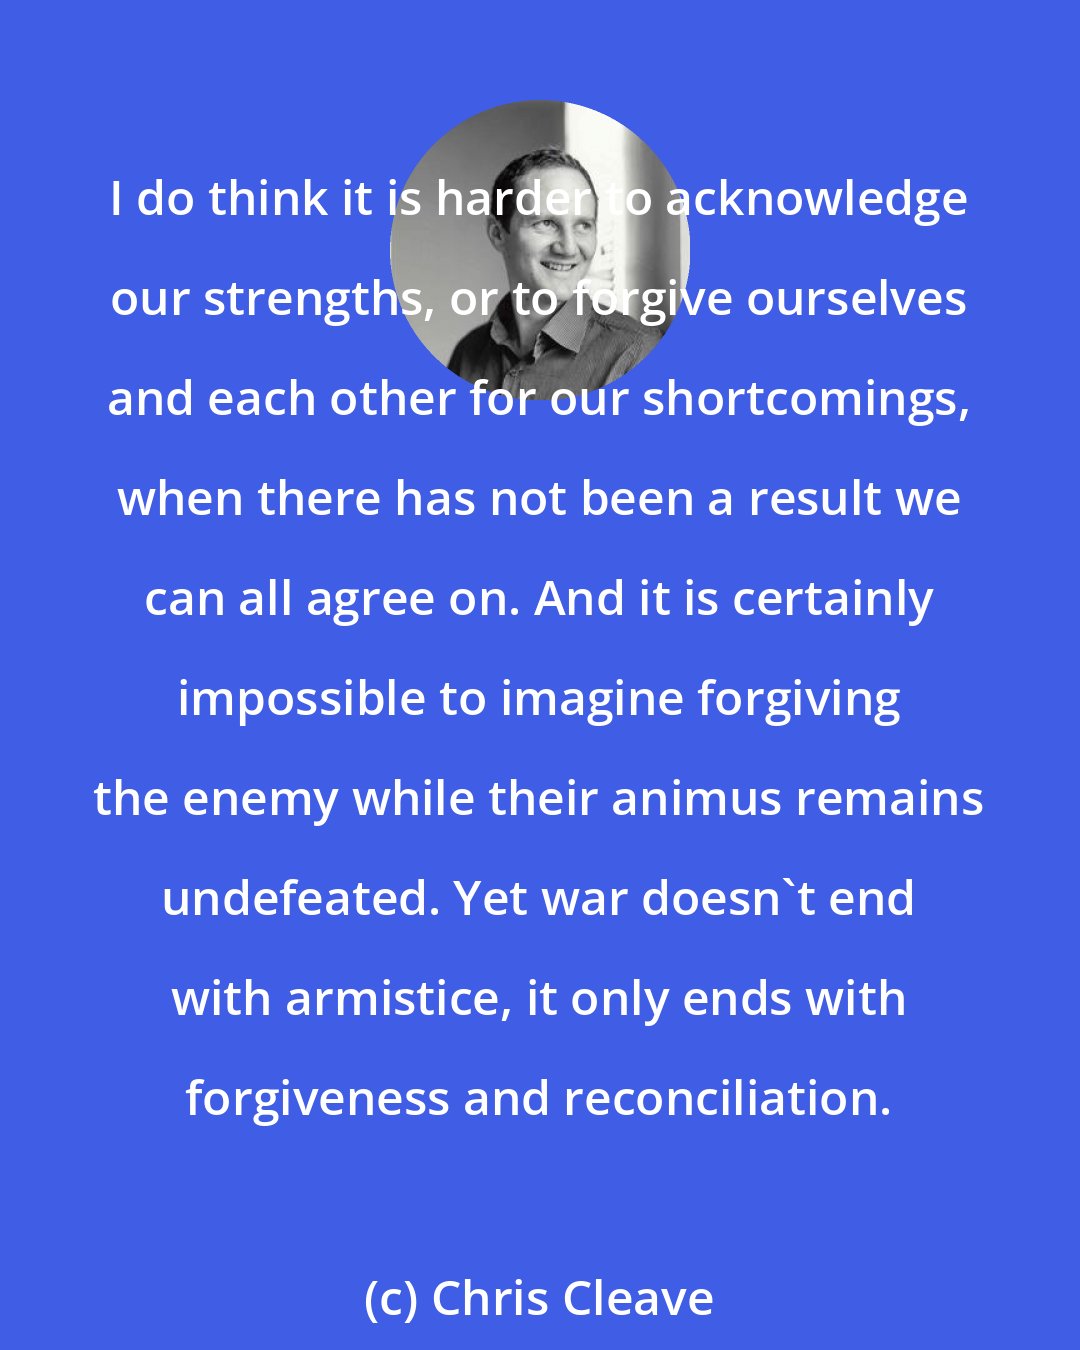 Chris Cleave: I do think it is harder to acknowledge our strengths, or to forgive ourselves and each other for our shortcomings, when there has not been a result we can all agree on. And it is certainly impossible to imagine forgiving the enemy while their animus remains undefeated. Yet war doesn't end with armistice, it only ends with forgiveness and reconciliation.